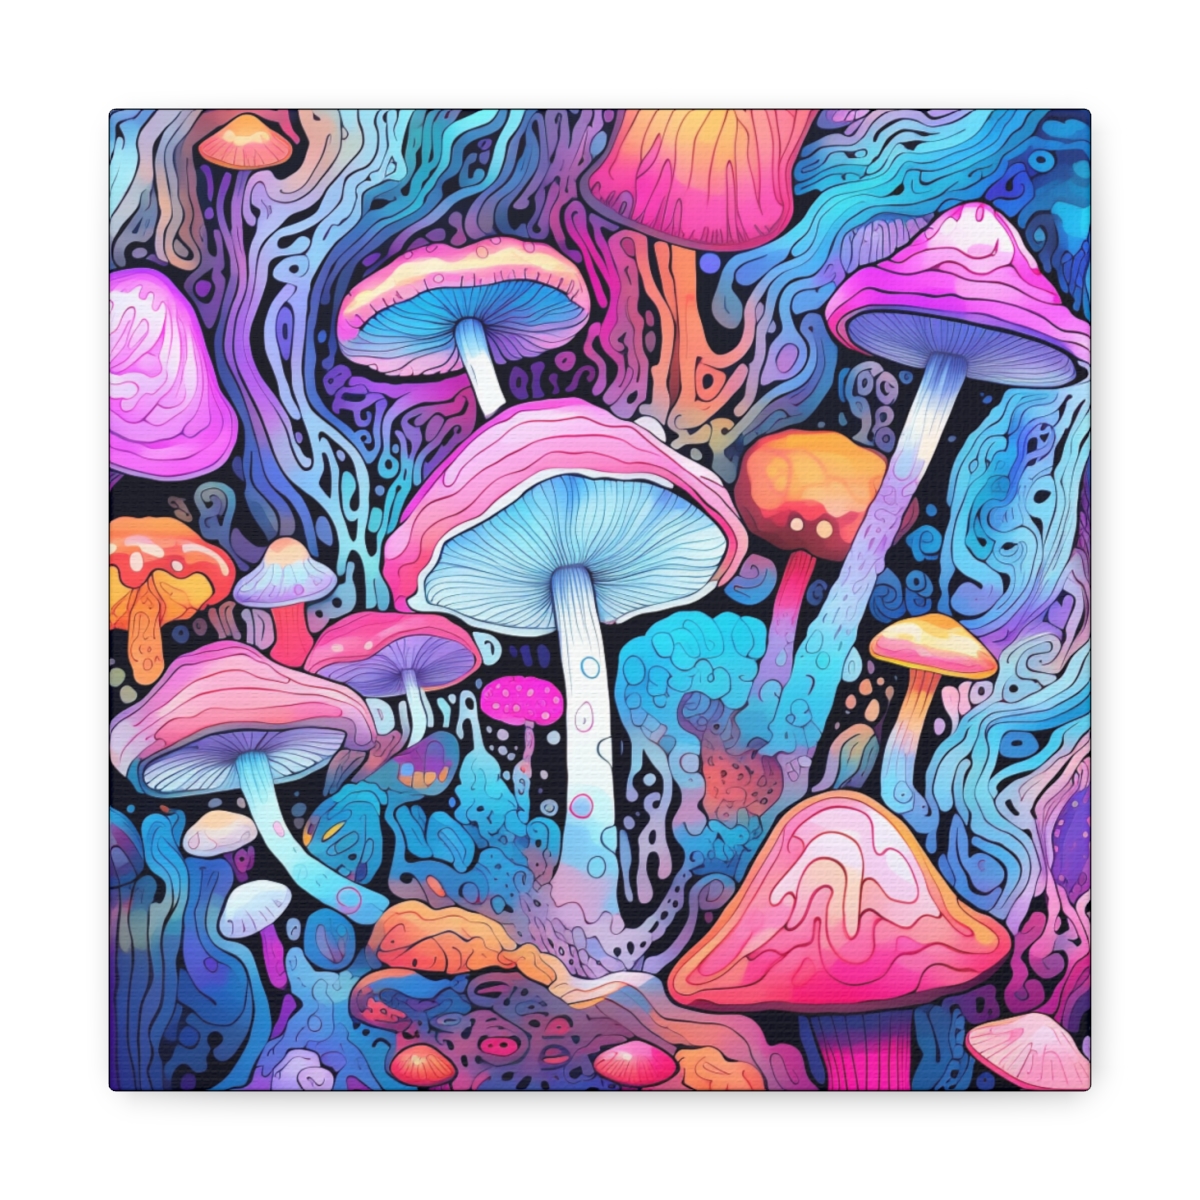 Psychedelic Trippy Mushroom Art Canvas Print: Little Pieces Of Healing